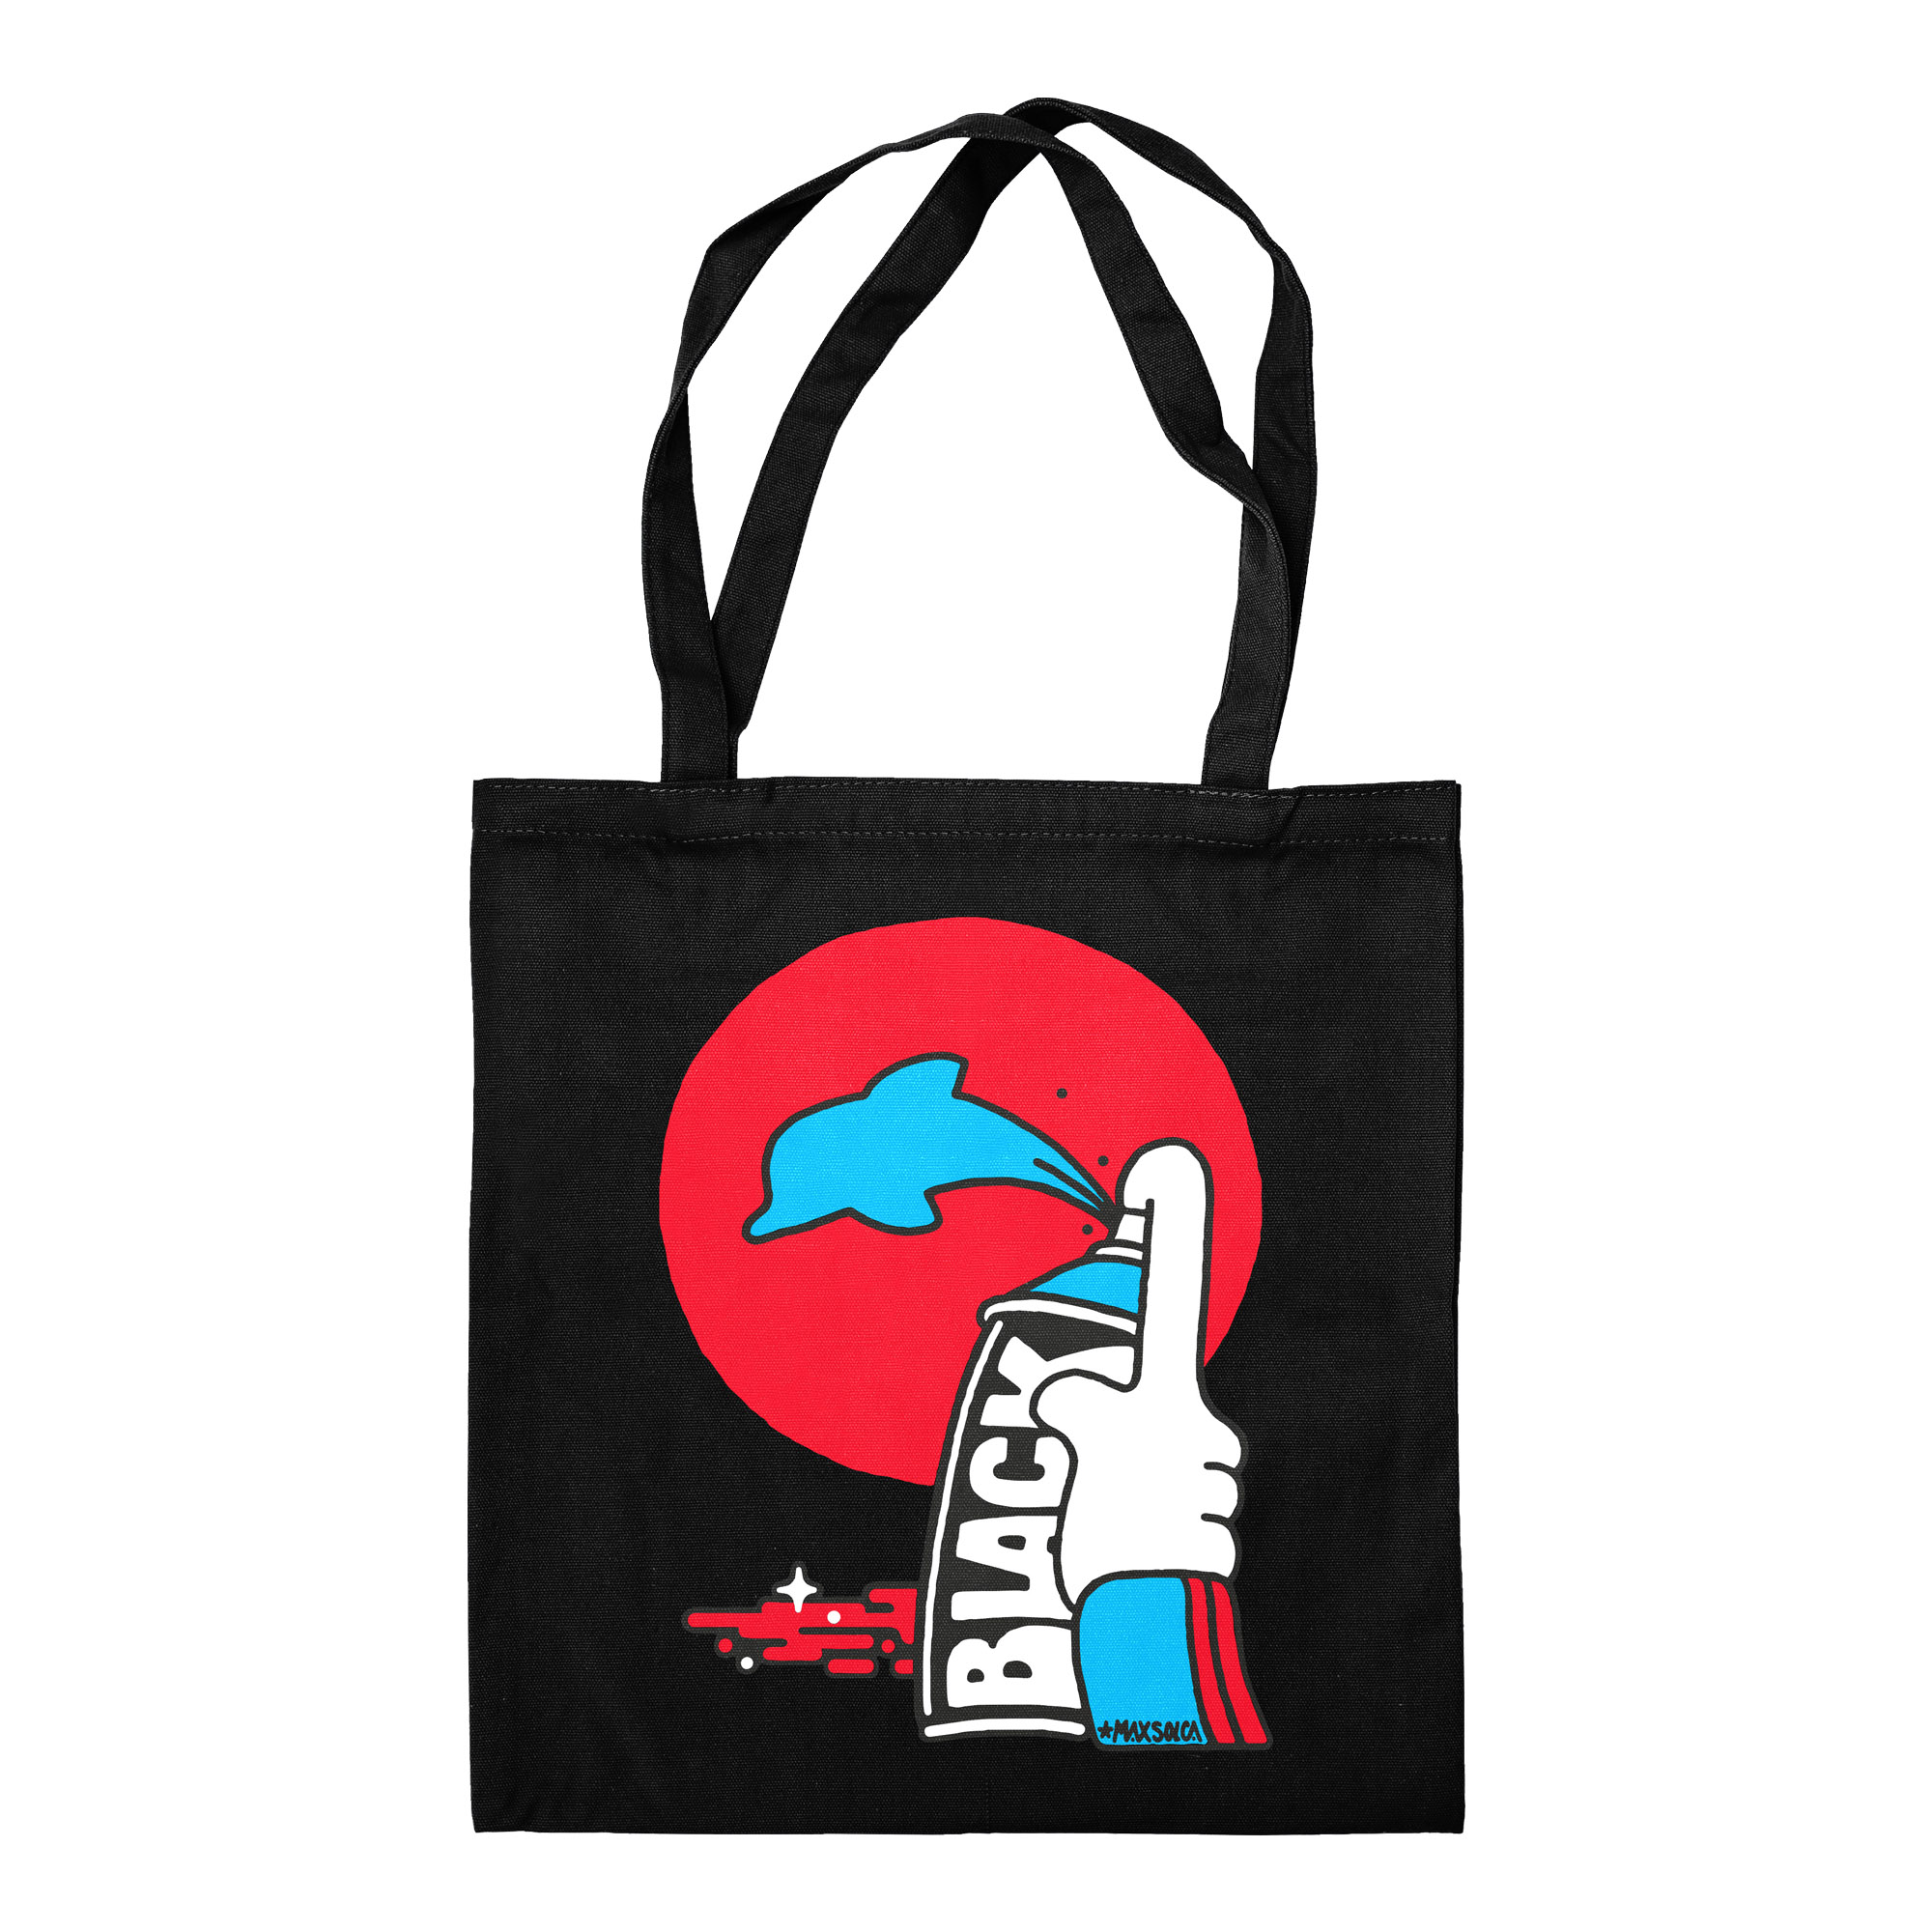 Montana Cotton Bag "Dolphin" by Max Solca